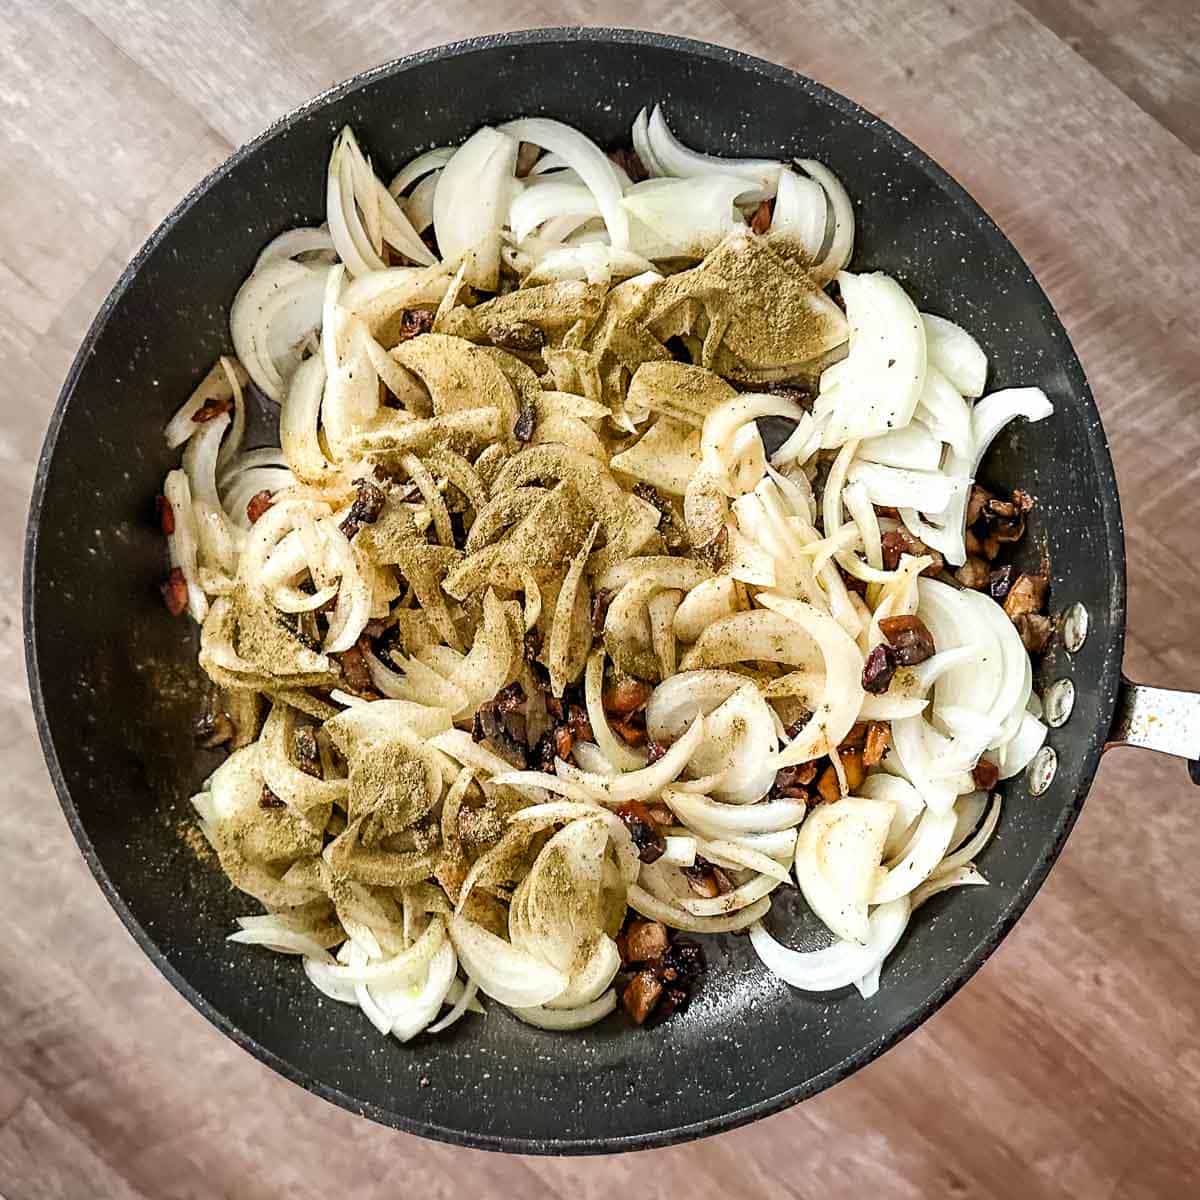 Onion, mushroom, and poultry seasoning in a frying pan.